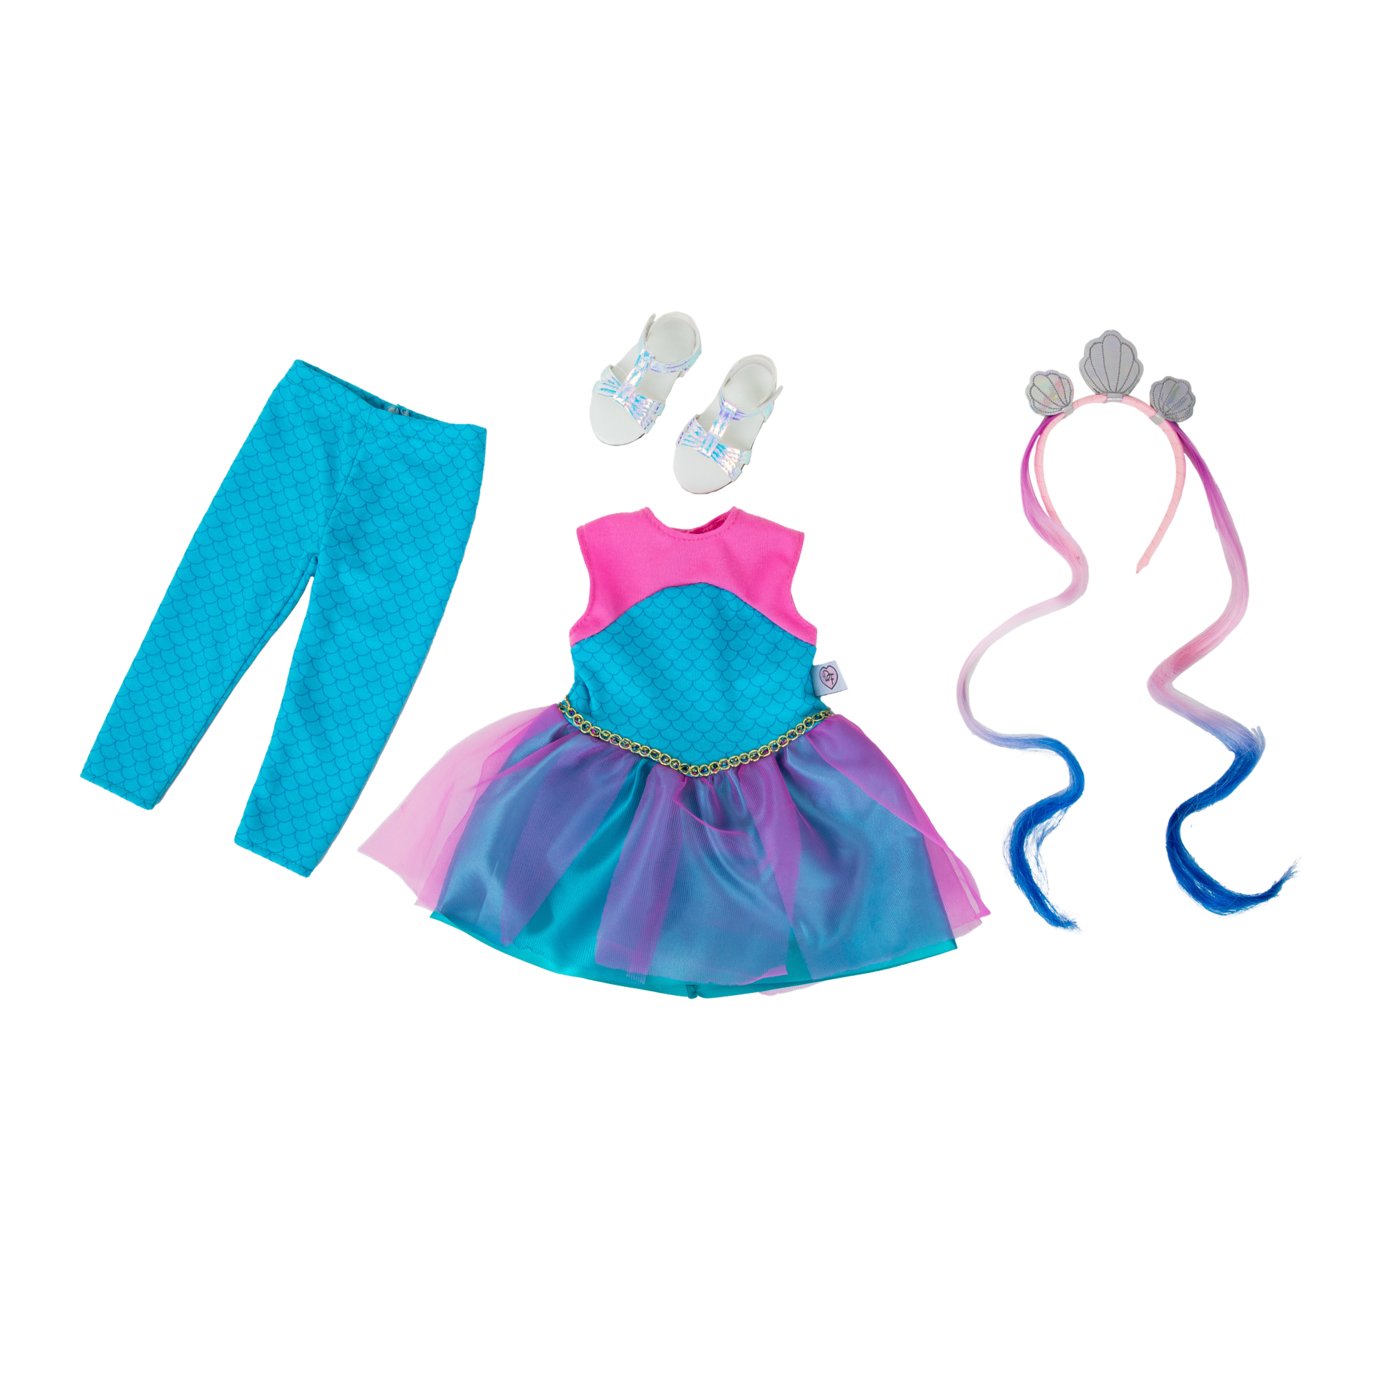 Designafriend Magical Mermaid Doll Outfit Review